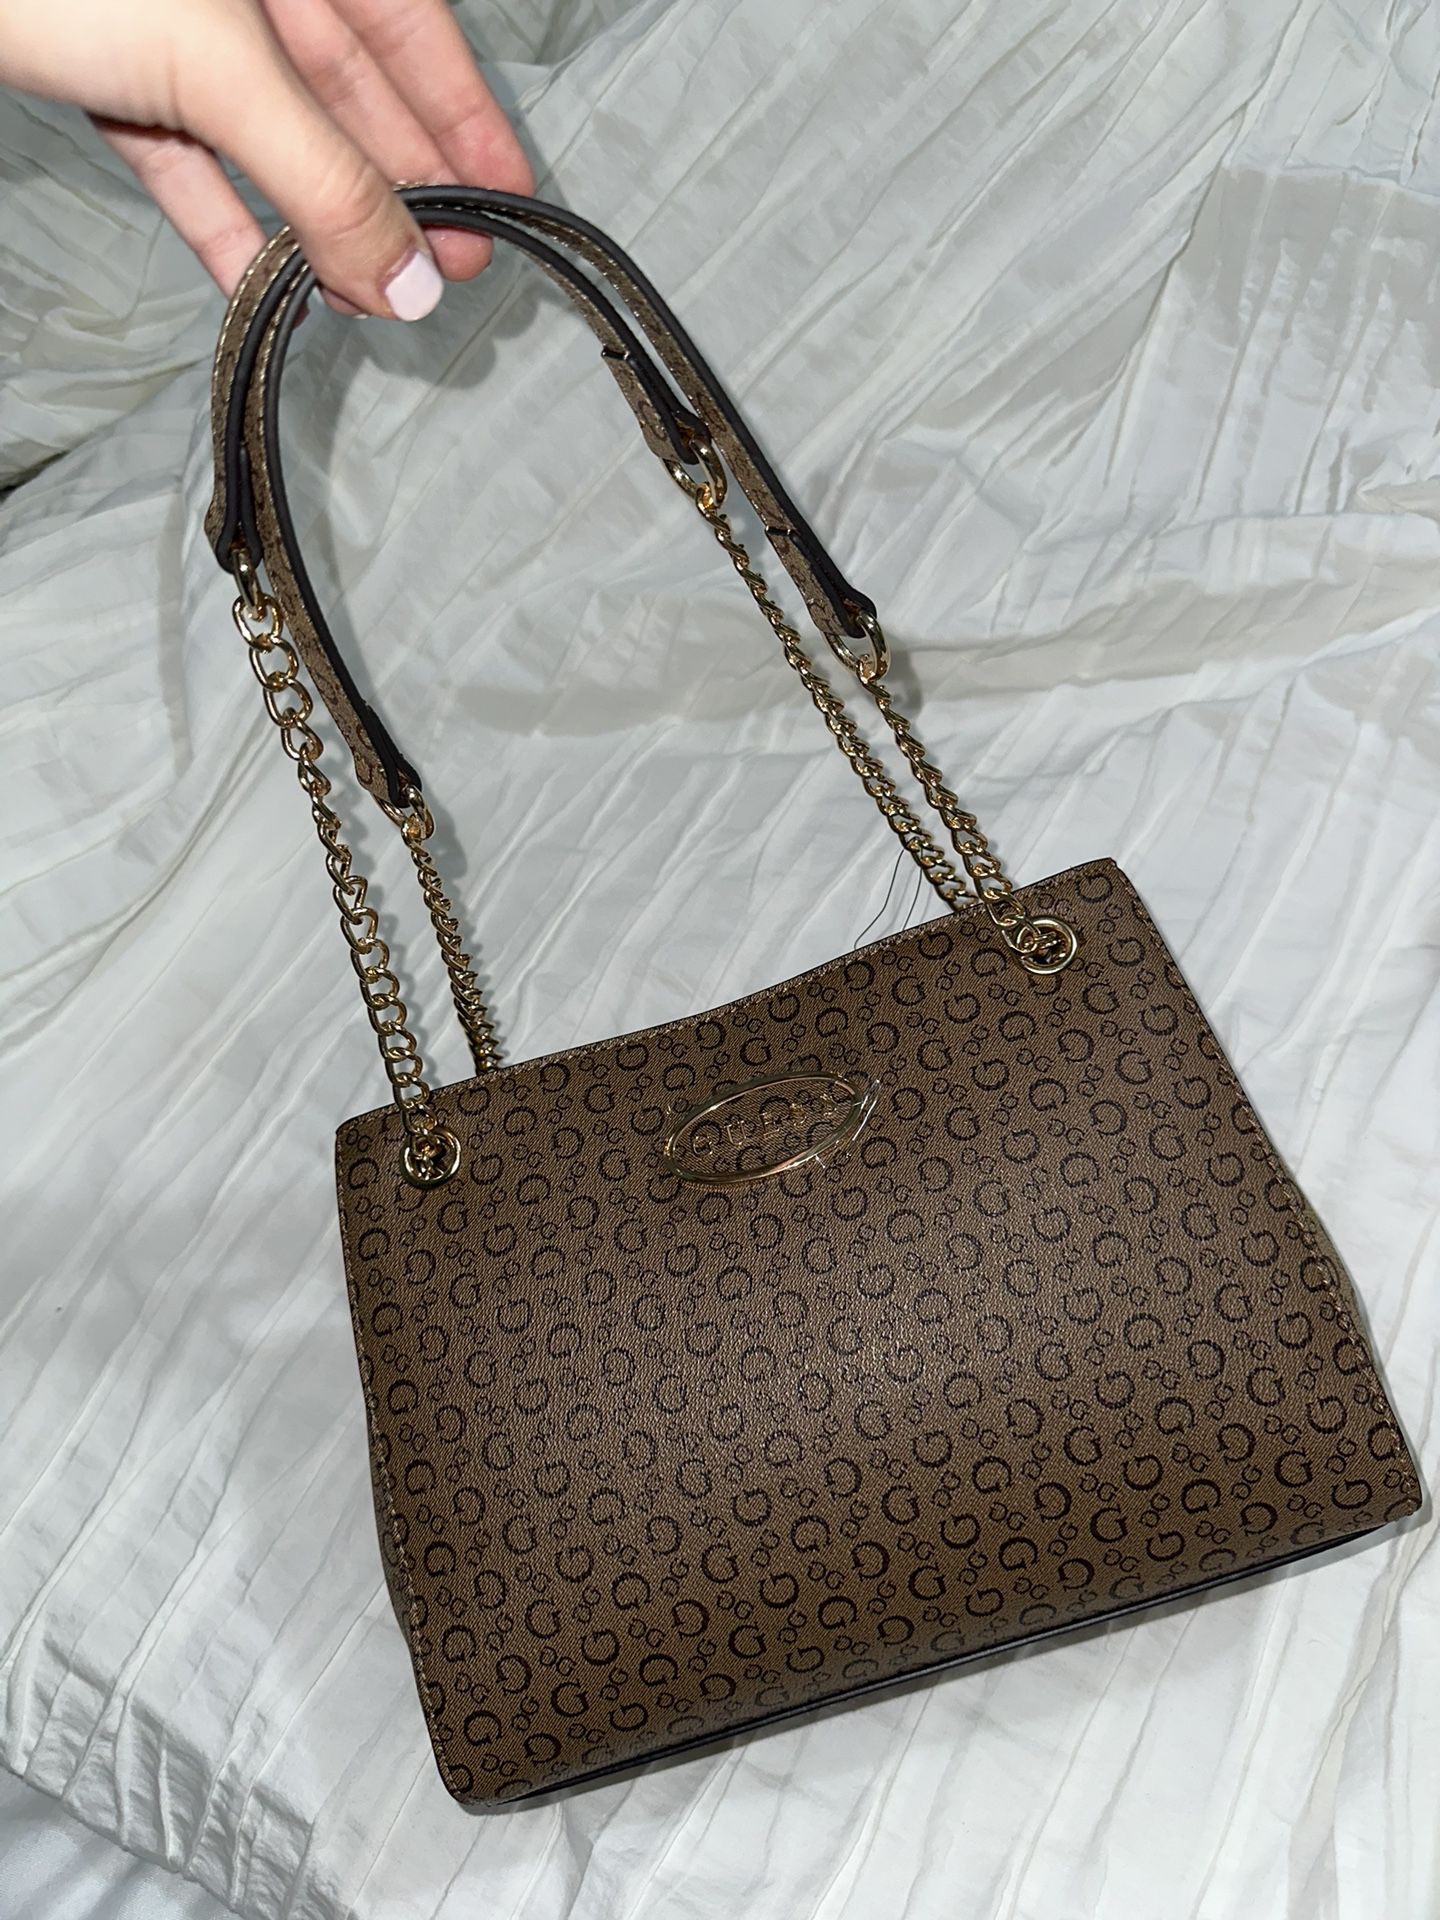 Guess Shoulder Bag Brown With Gold Brand New